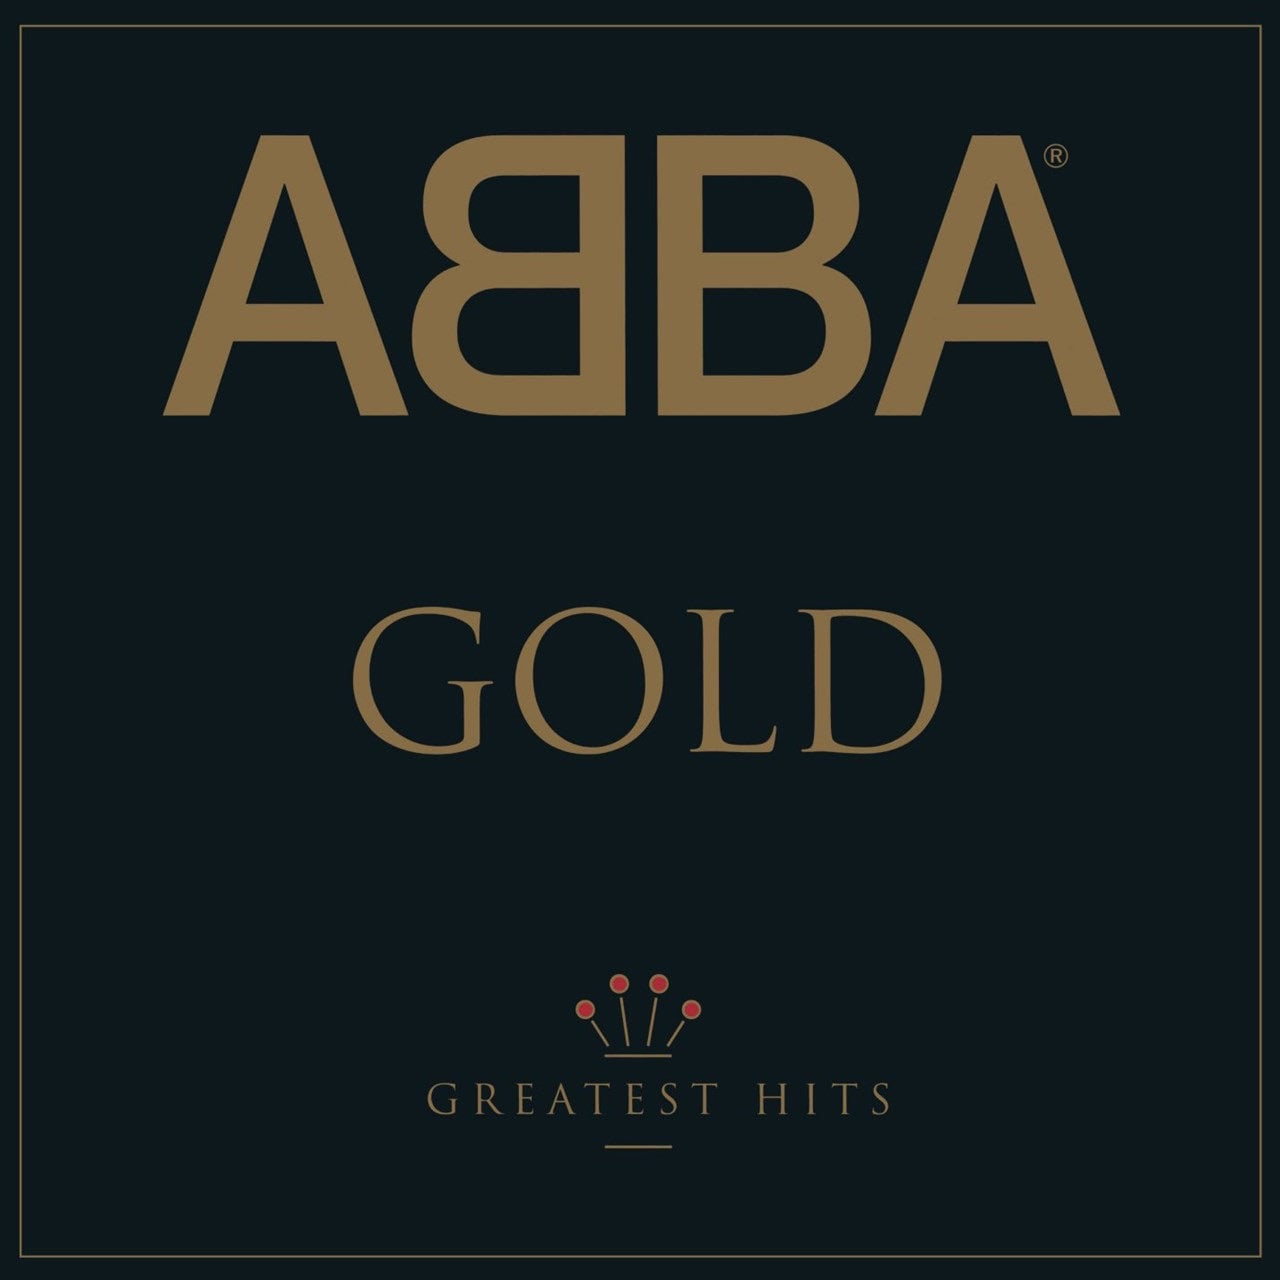 ABBA - Gold (2LP Greatest Hits)